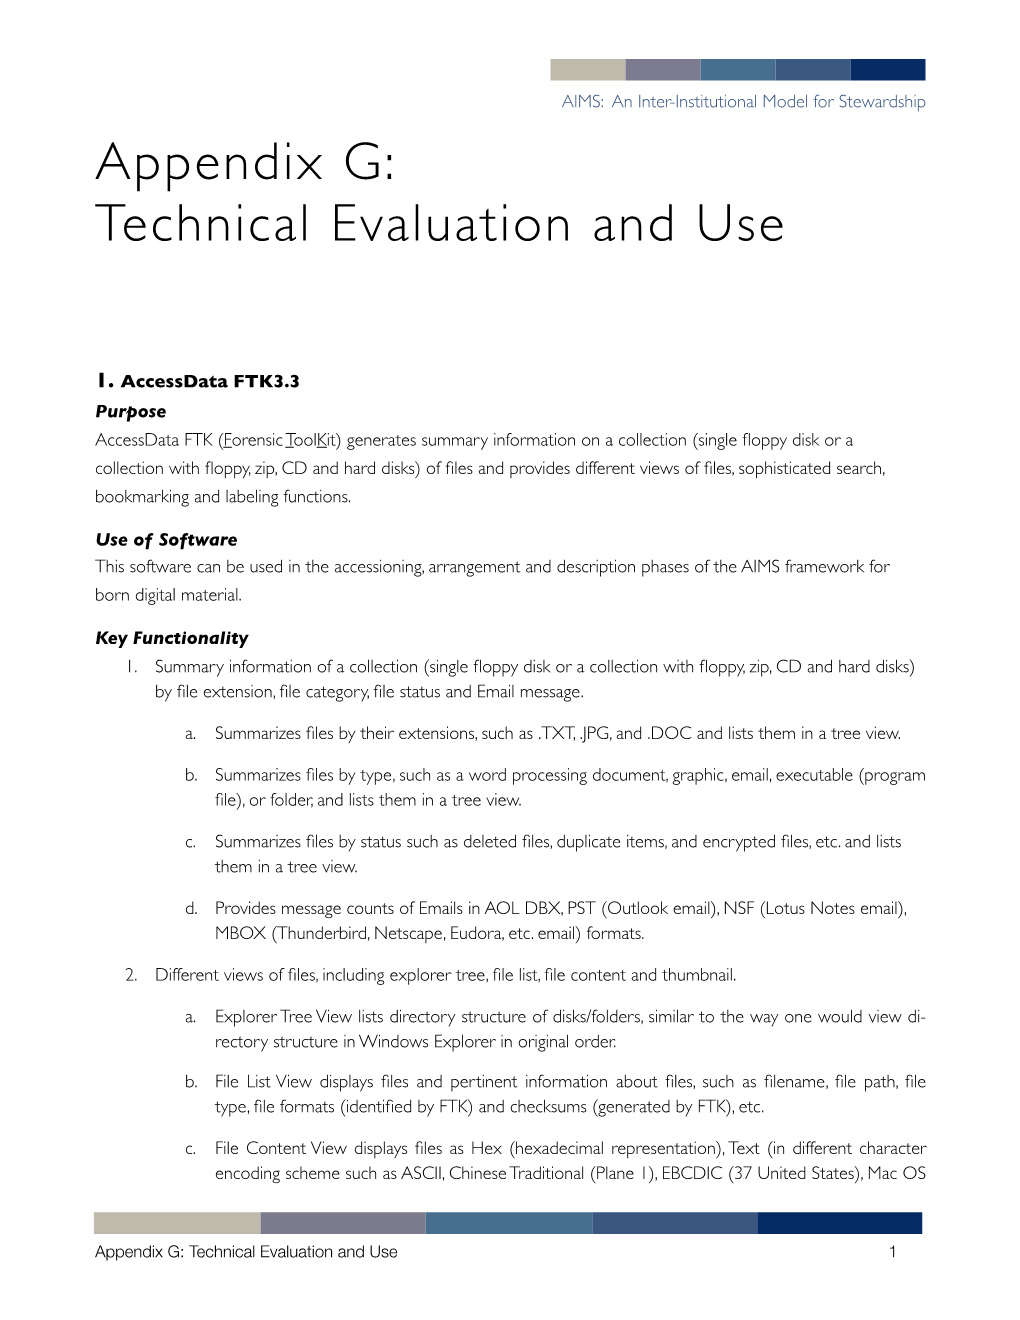 Technical Evaluation and Use